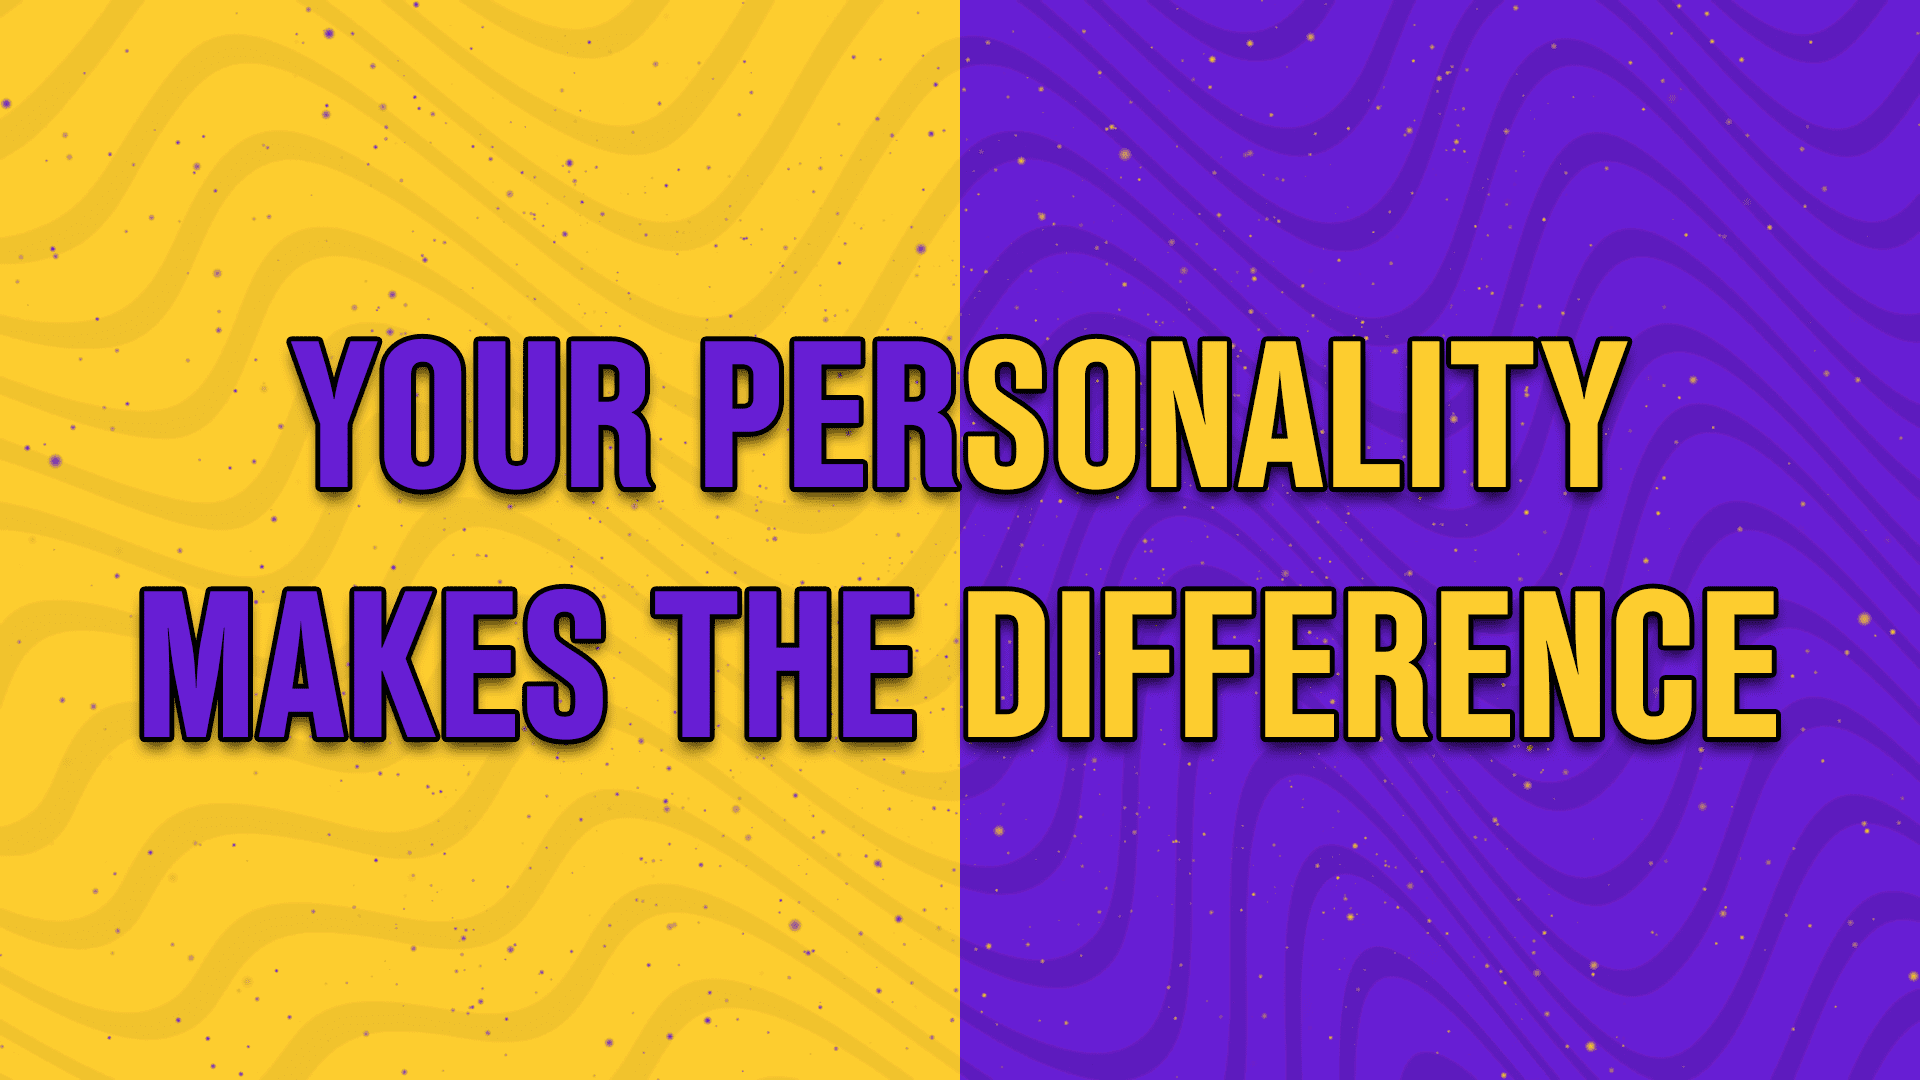 Your personality makes the difference - StreamBee